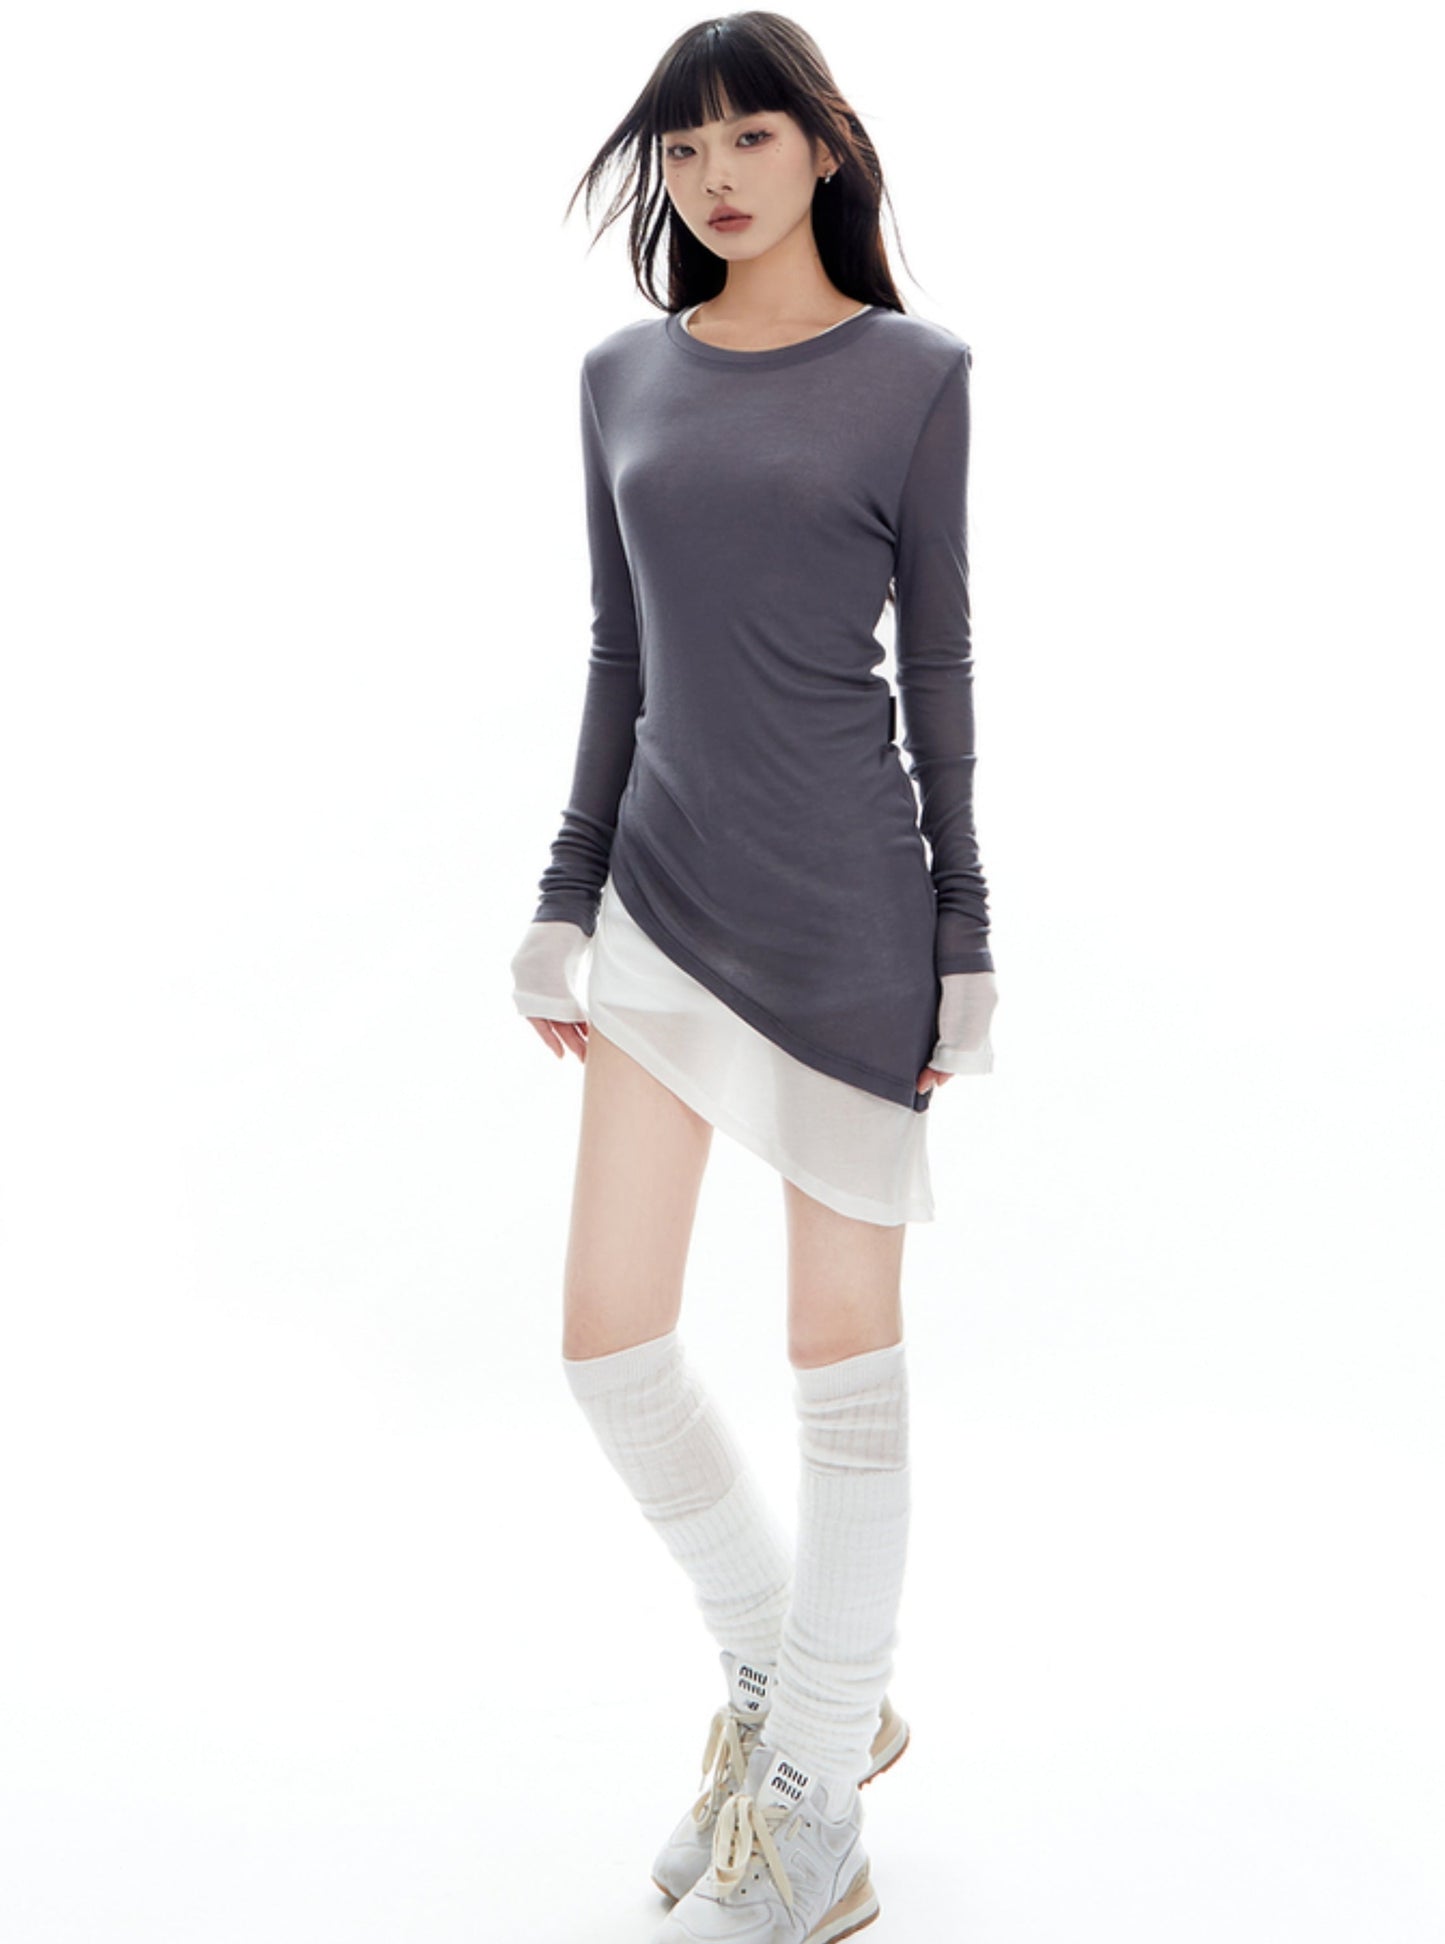 Slim Contrast Fake Two Knit Tops